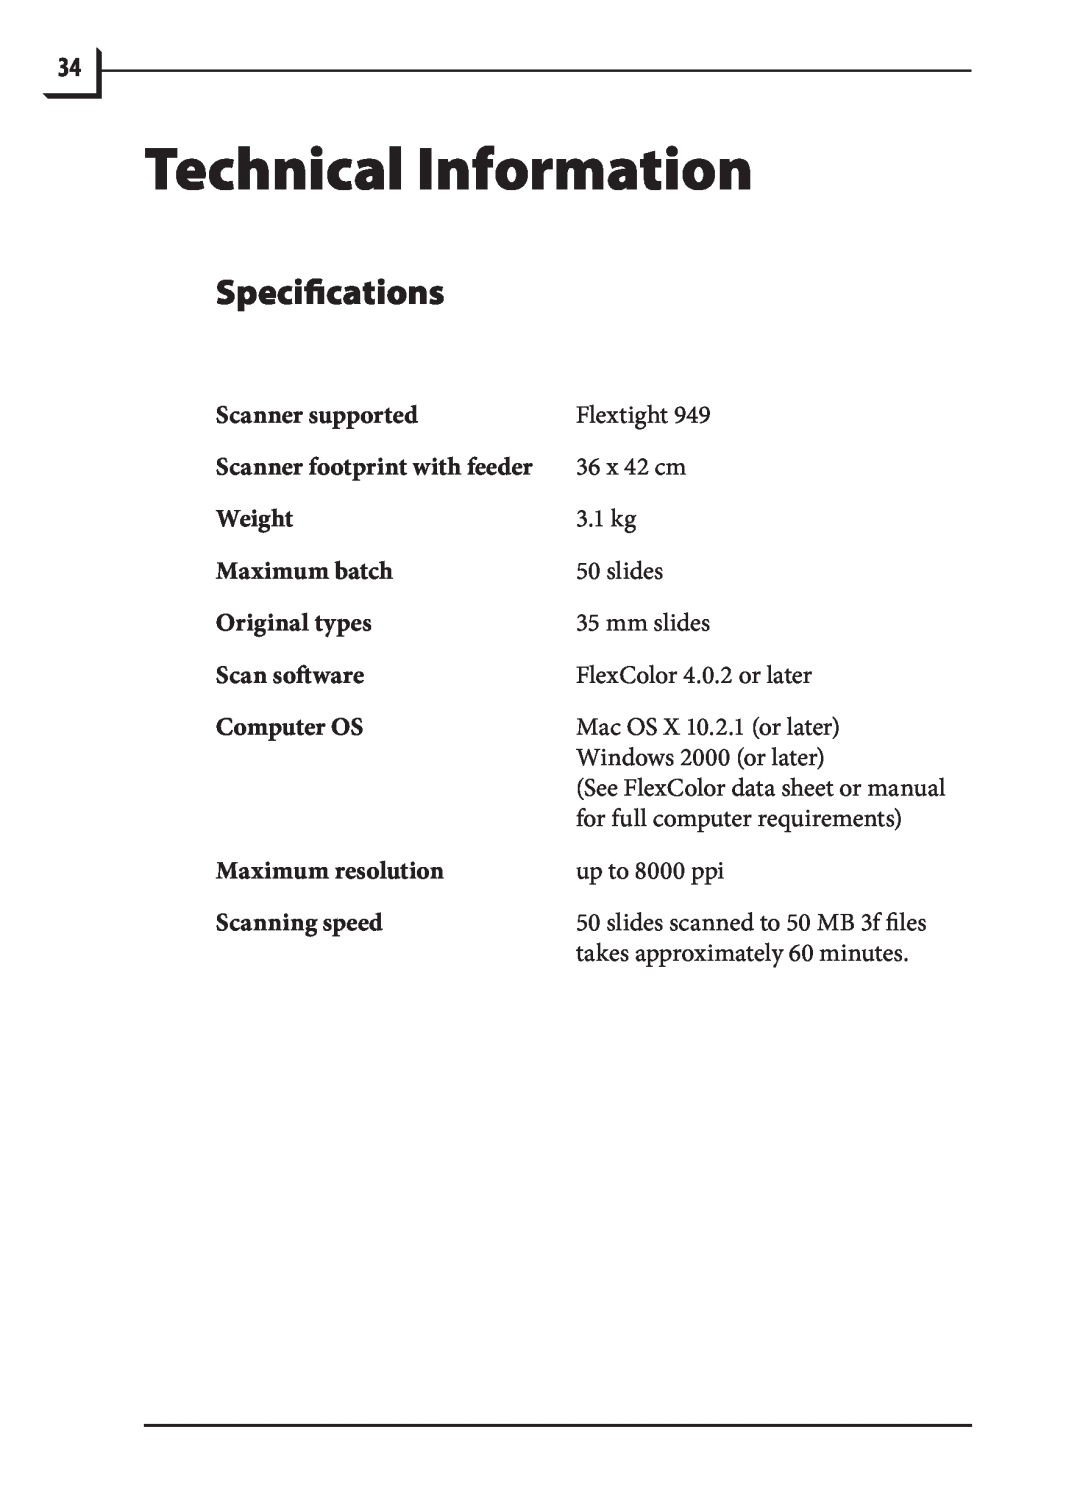 Hasselblad 949 manual Technical Information, Specifications, Scanner supported, Scanner footprint with feeder, Weight 